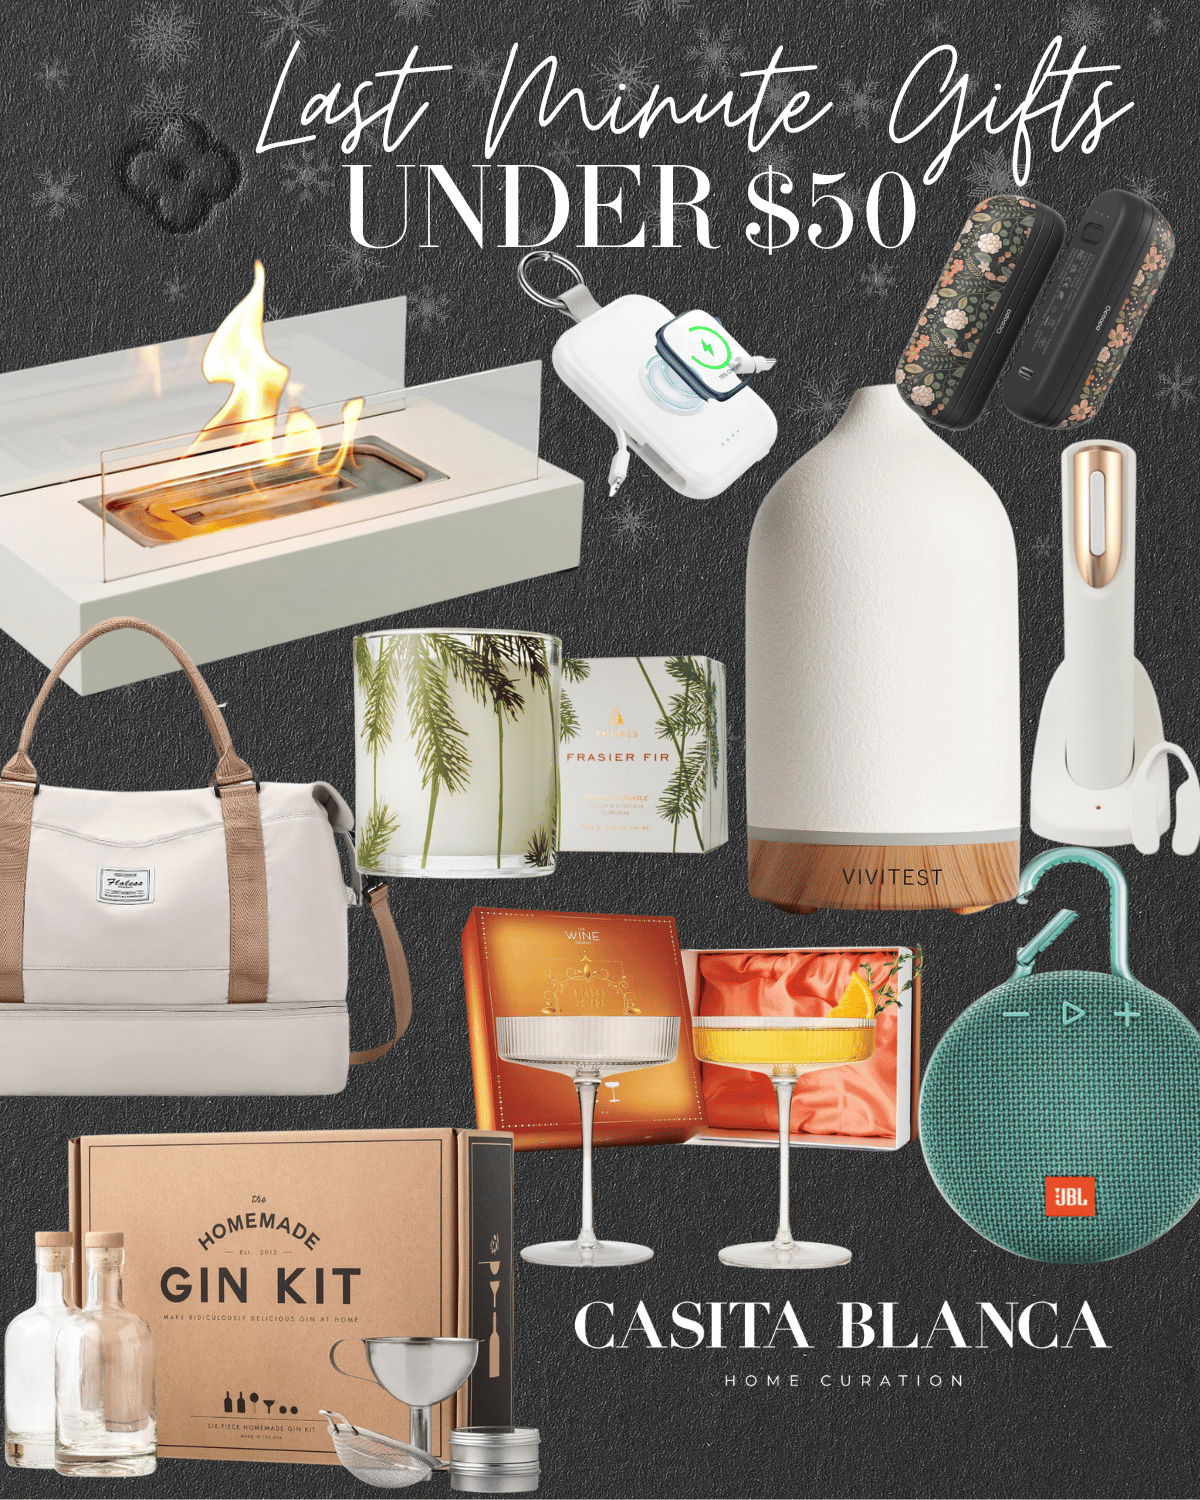 last minute gift ideas | #last #minute #gifts #giftideas #giftsunder50 #giftideasunder50 #under50 #tabletopfire #coupeglasses #speaker #gin #essentialoil #candle #travel